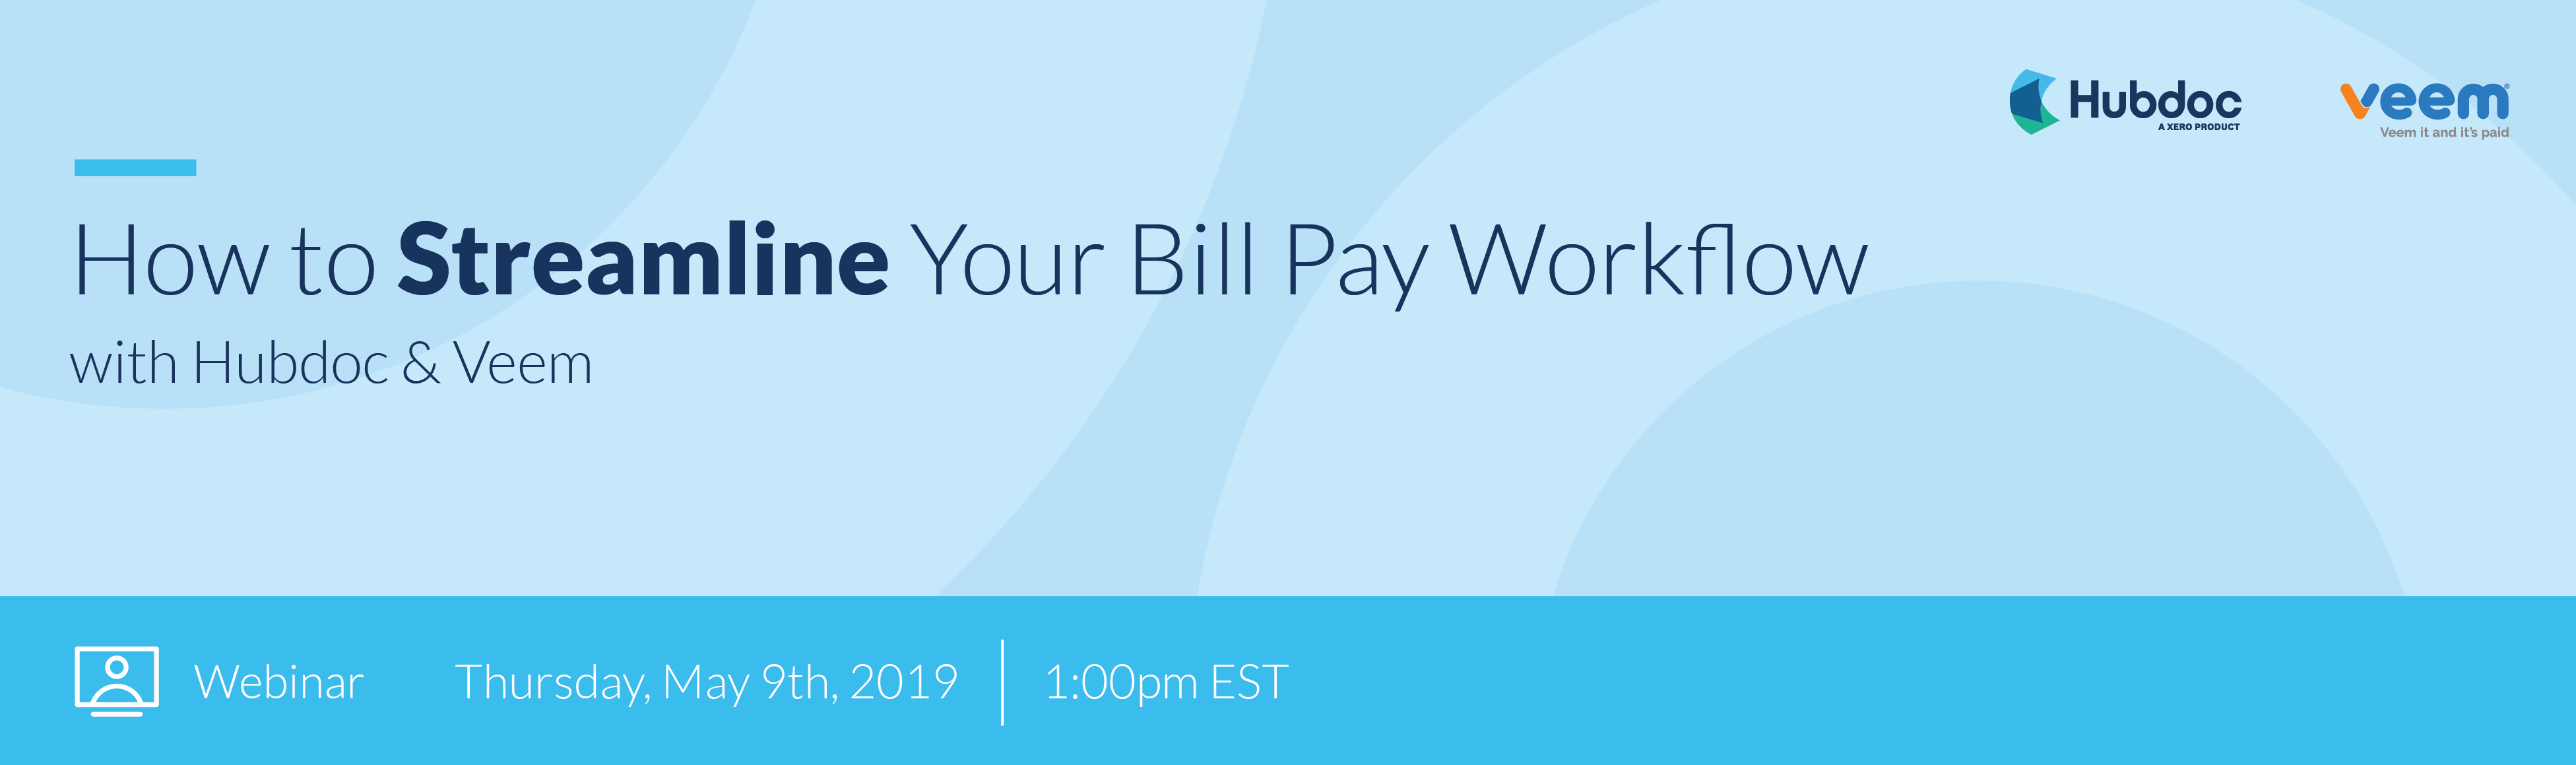 How to Streamline Your Bill Pay Workflow with Hubdoc & Veem